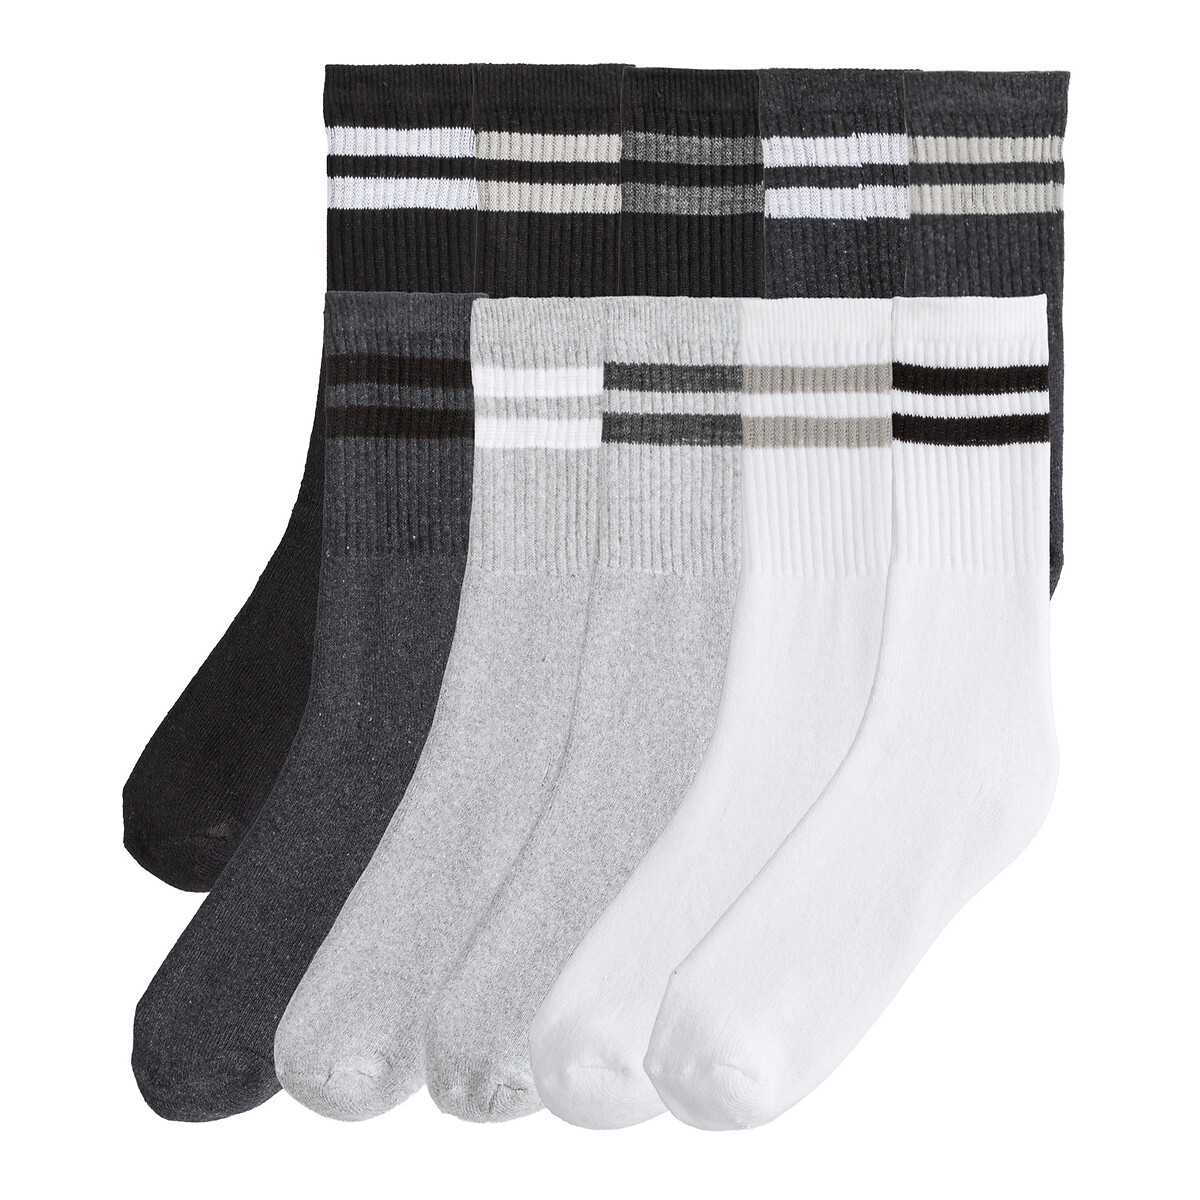 Pack of 10 Pairs of Sports Socks in Cotton Mix